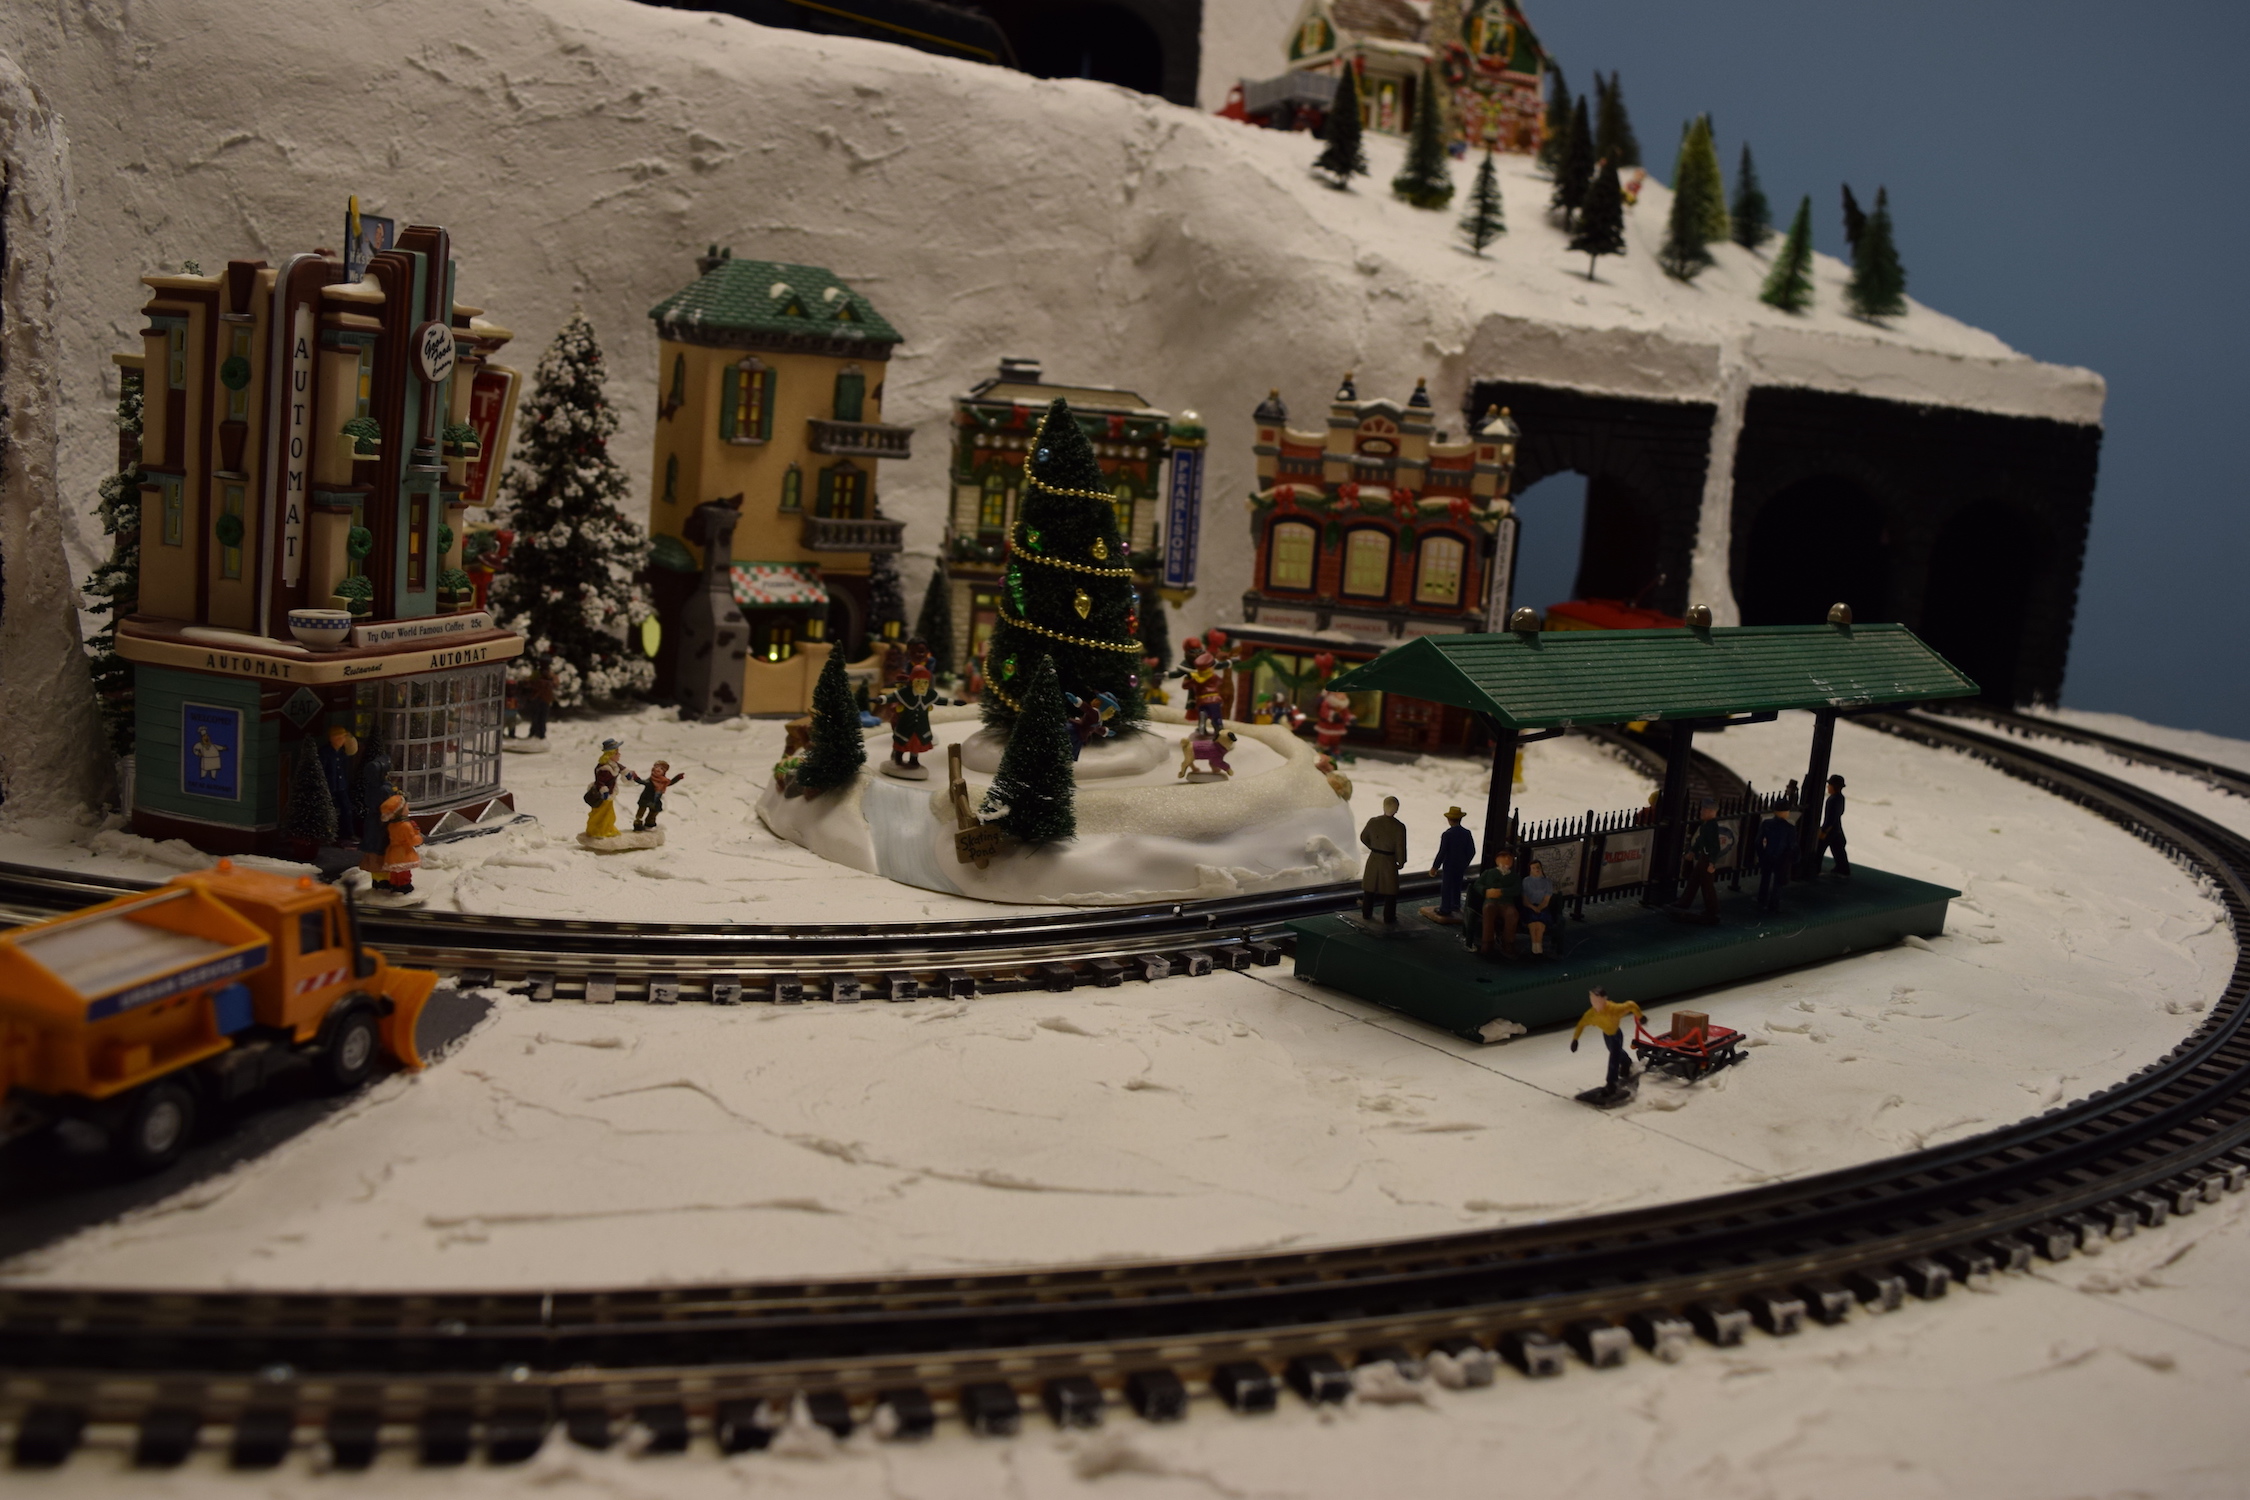 A winter scene in town - Christmas at the Roundhouse" model train display.